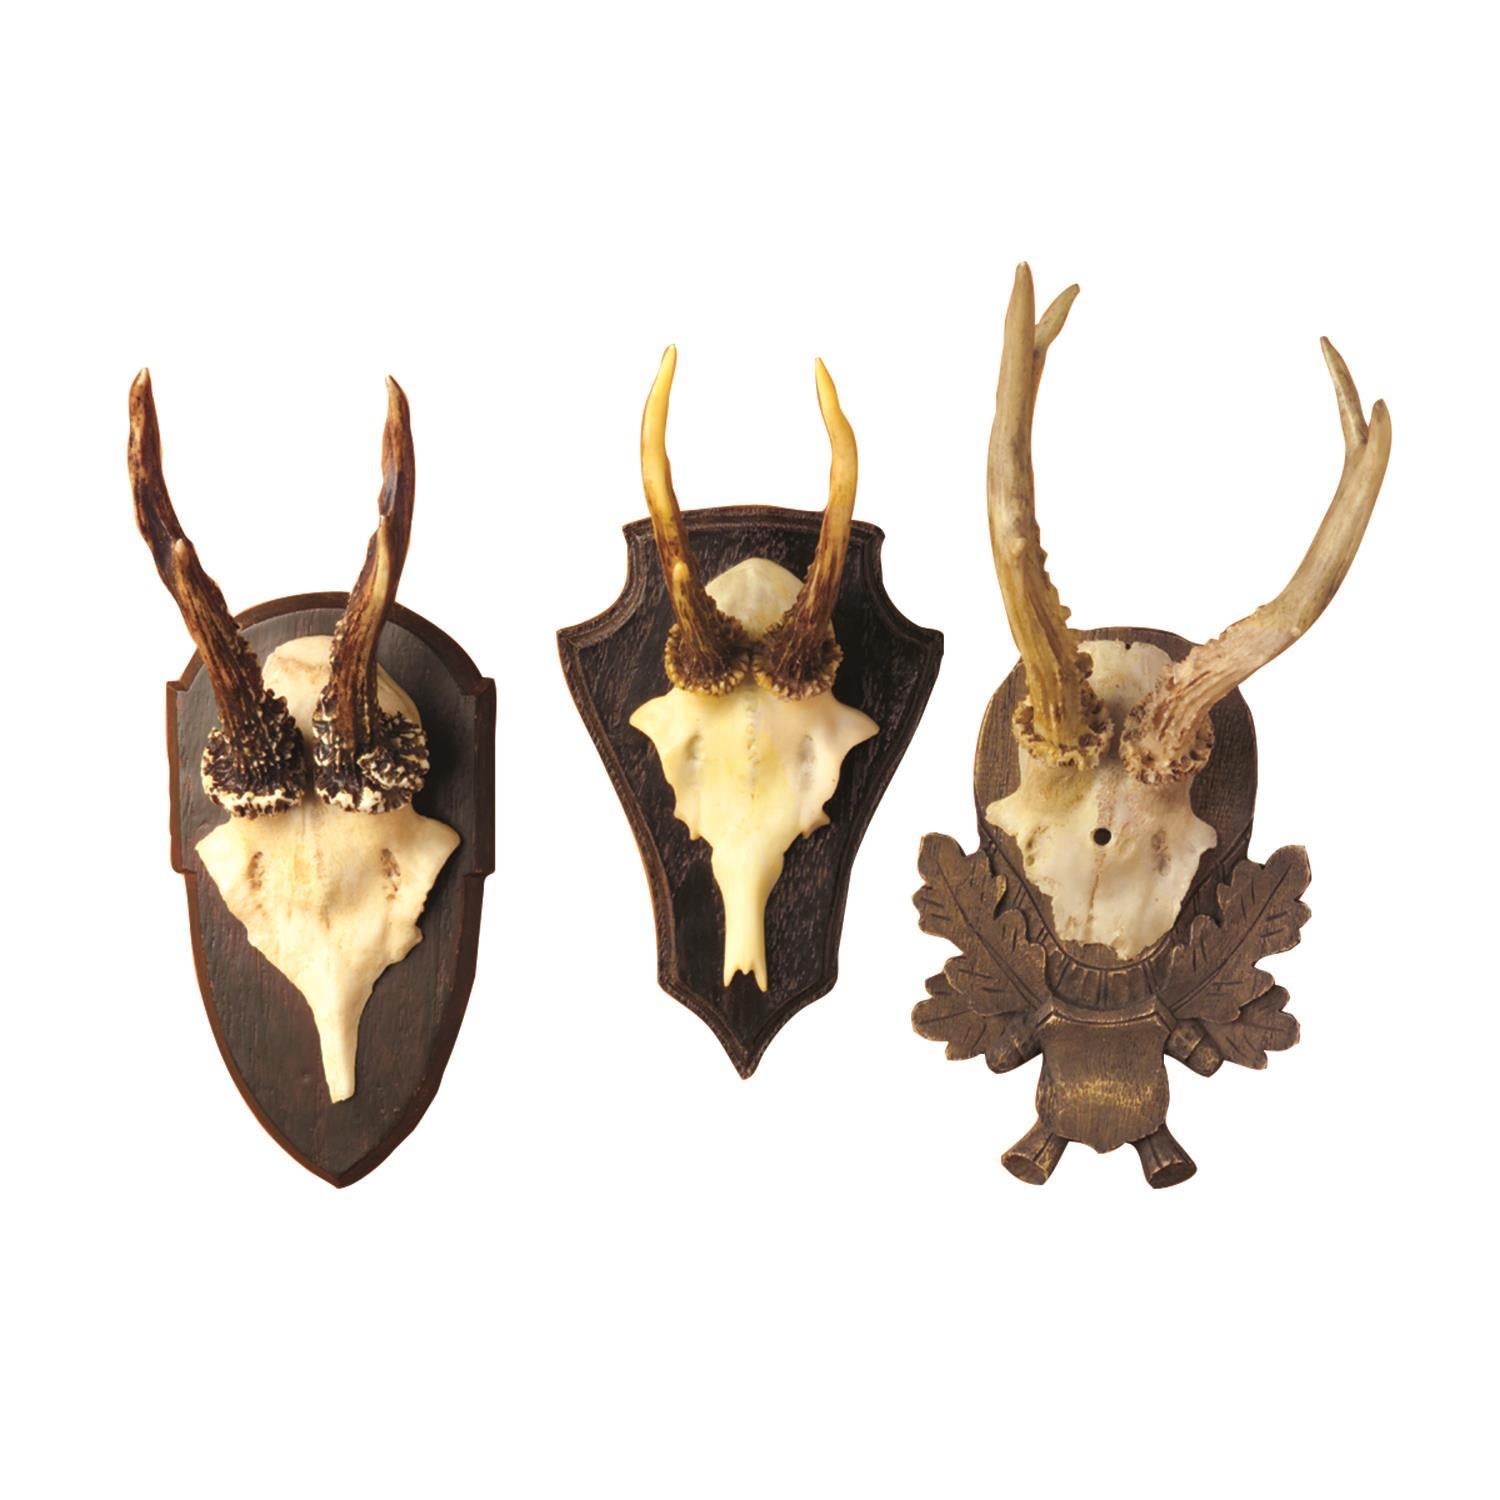 Two's Company The Hunt Club Antler Trophy Reproductions - Resin (set of 3)